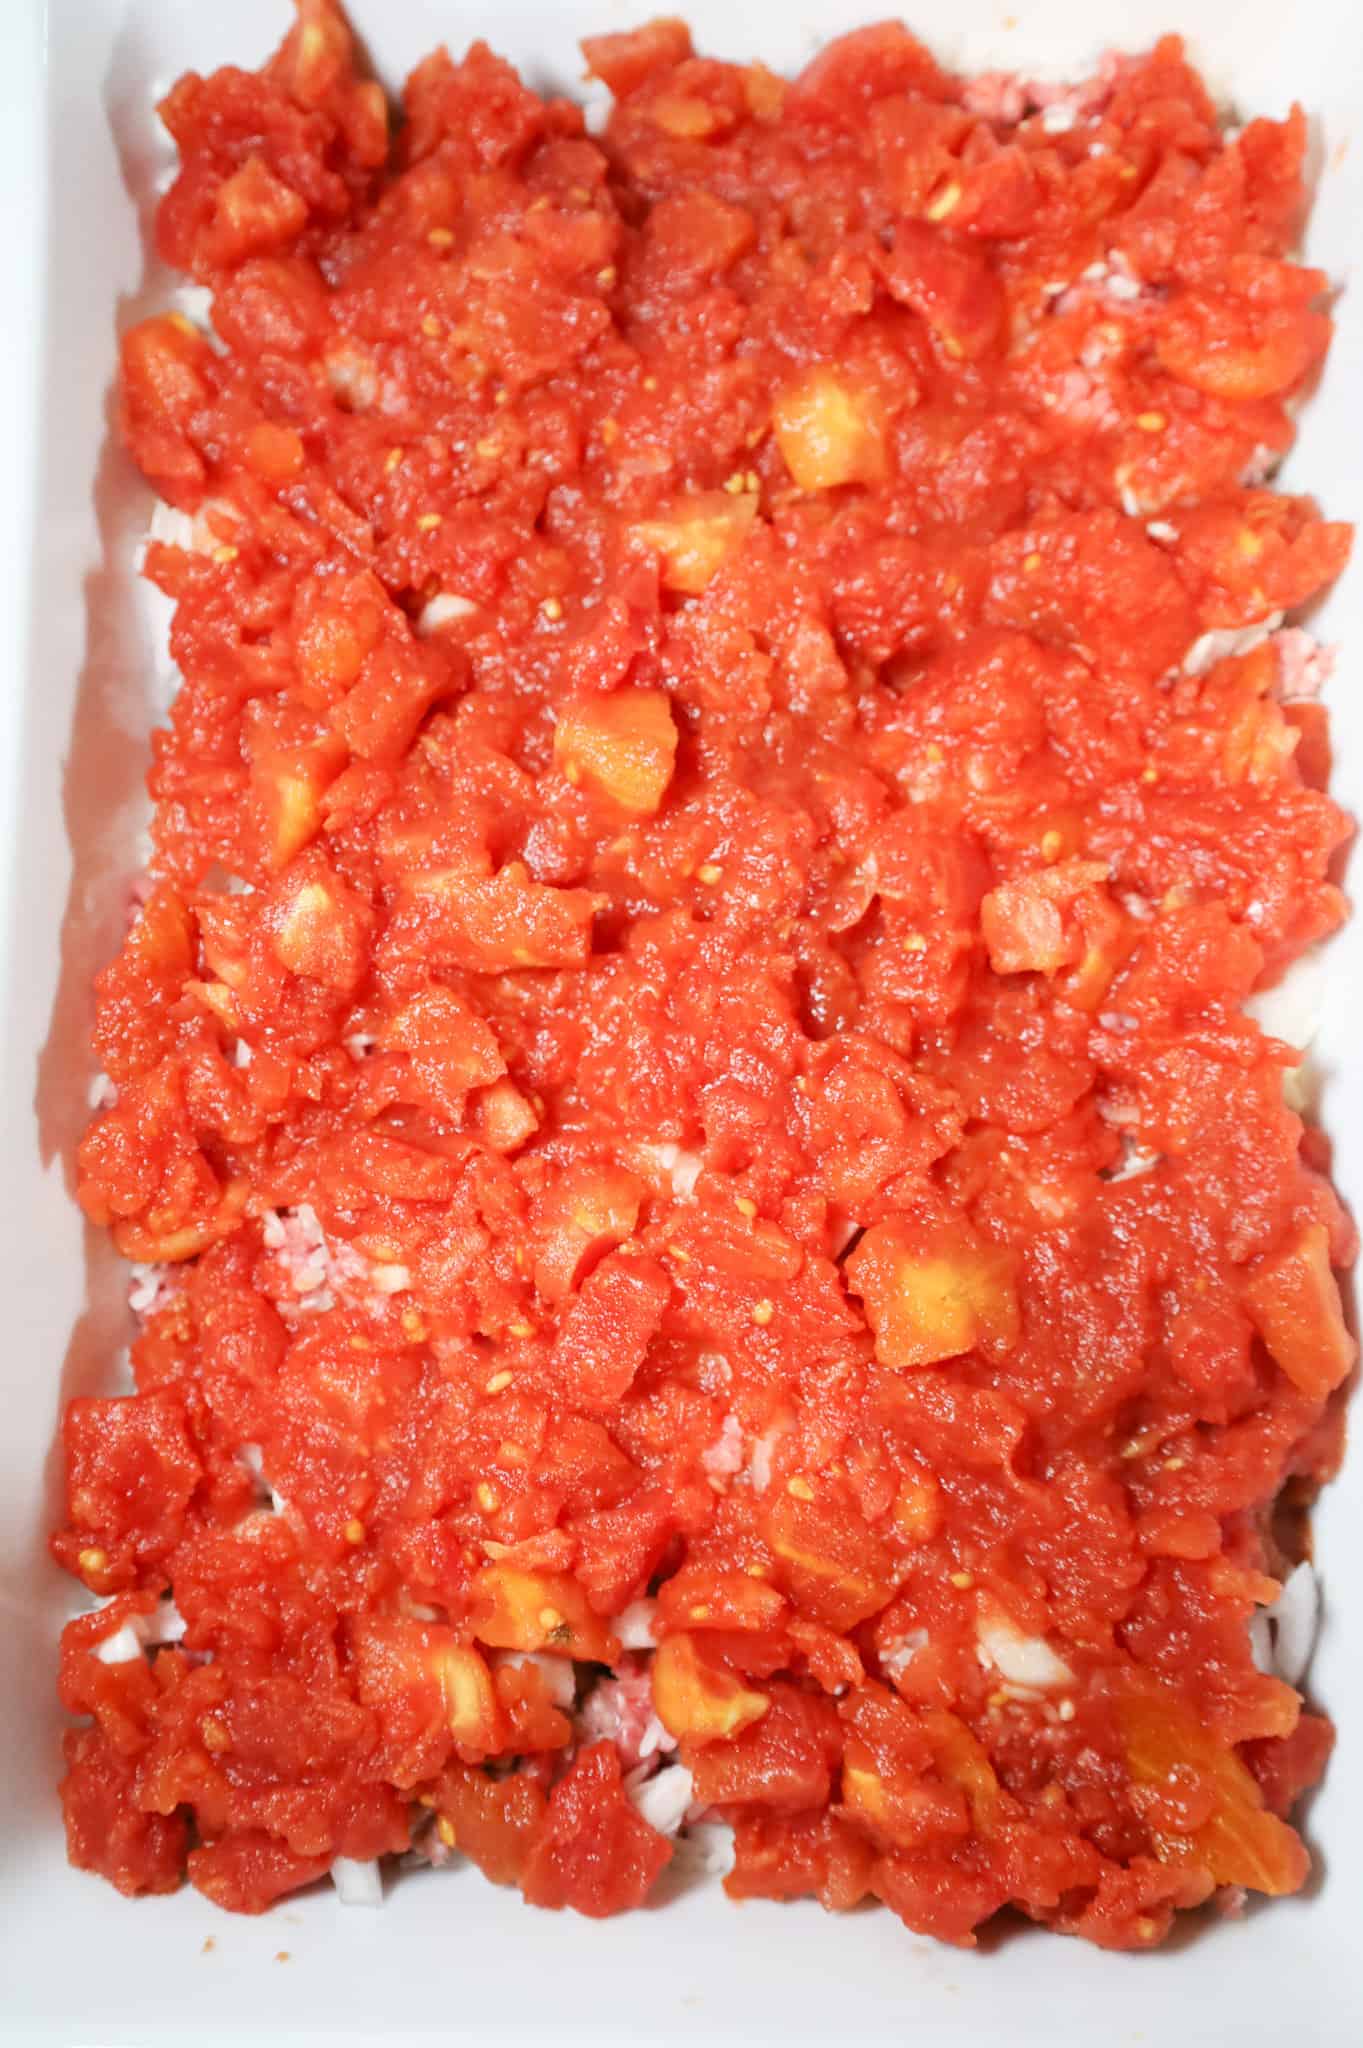 diced tomatoes on top of ground beef and potatoes in a casserole dish